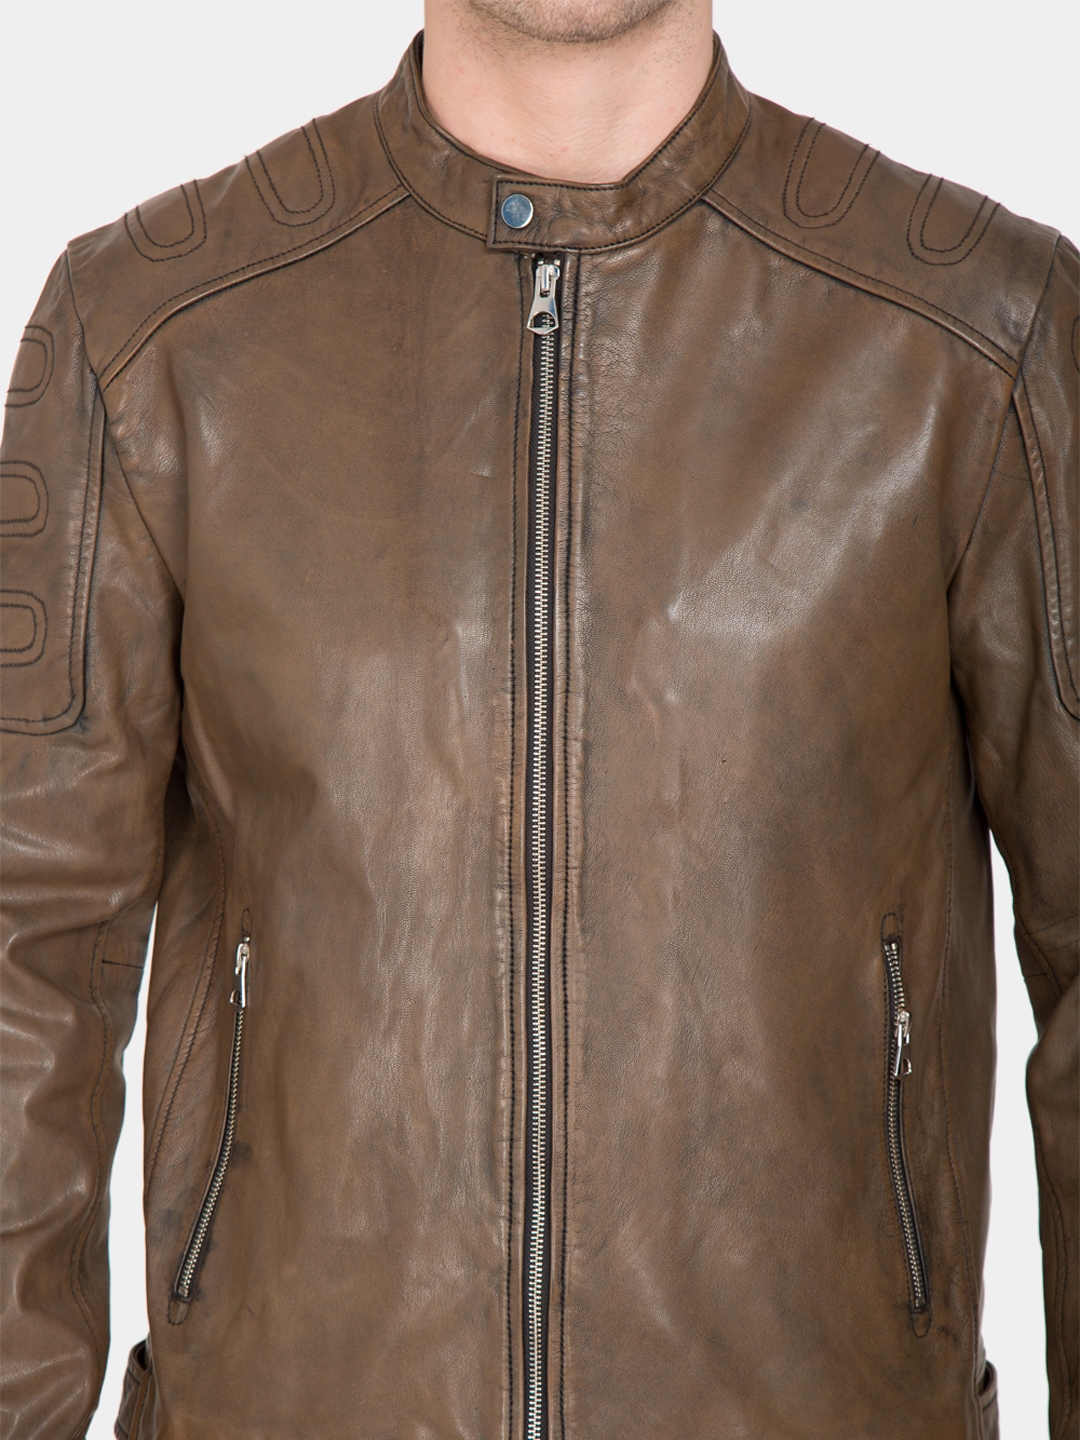 Justanned | JUSTANNED CAROB TAN LEATHER JACKET 5